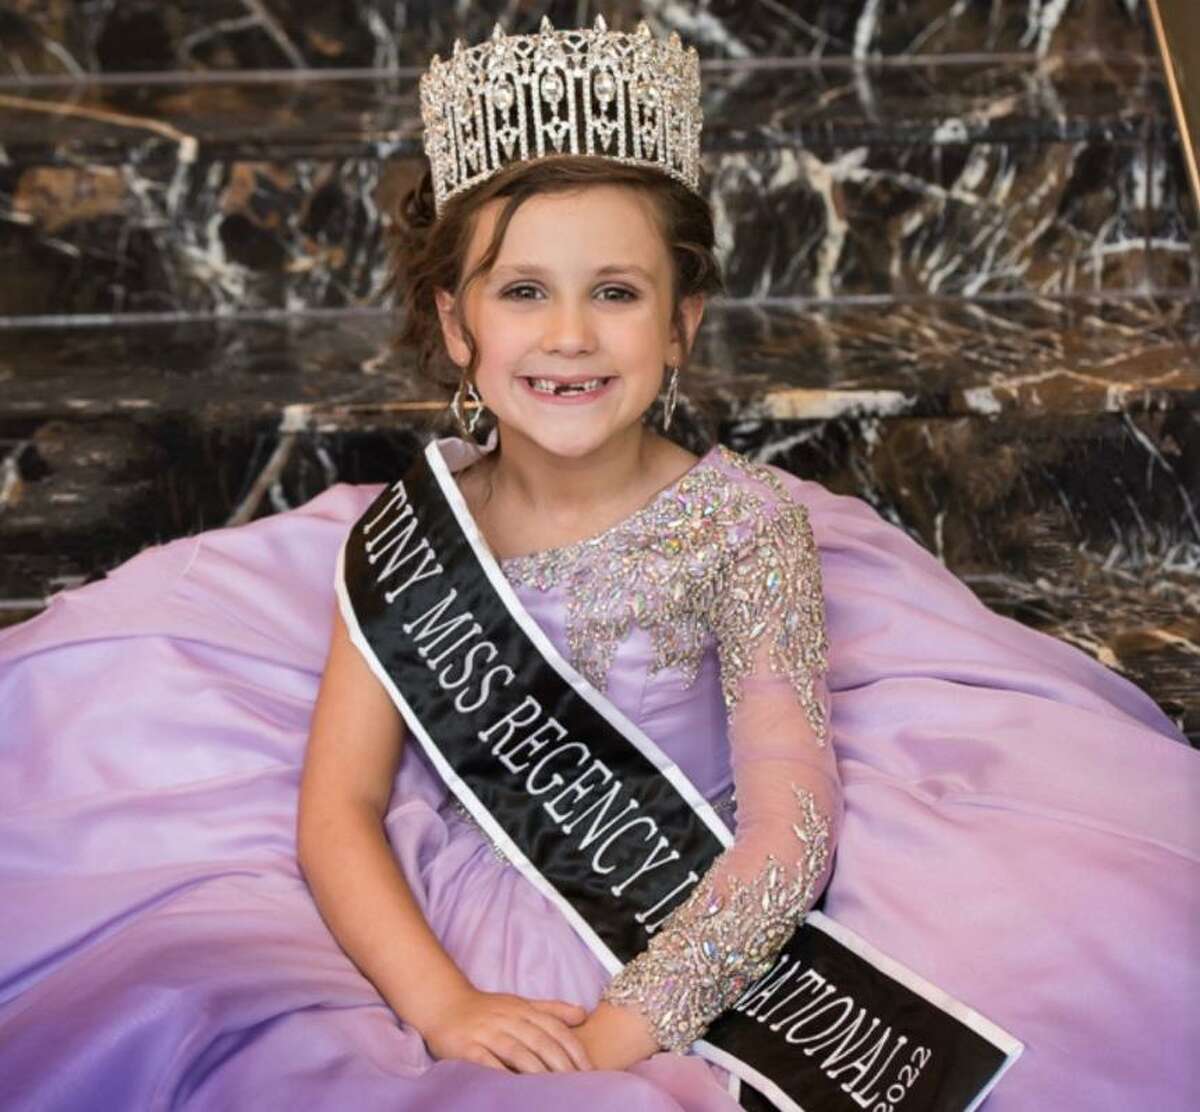 Makynlee Thomas, 5, is pictured just after winning the title of Tiny Miss Regency International in Las Vegas, Nevada. Makynlee has won numerous titles and awards and uses her queen status to help others through community service.